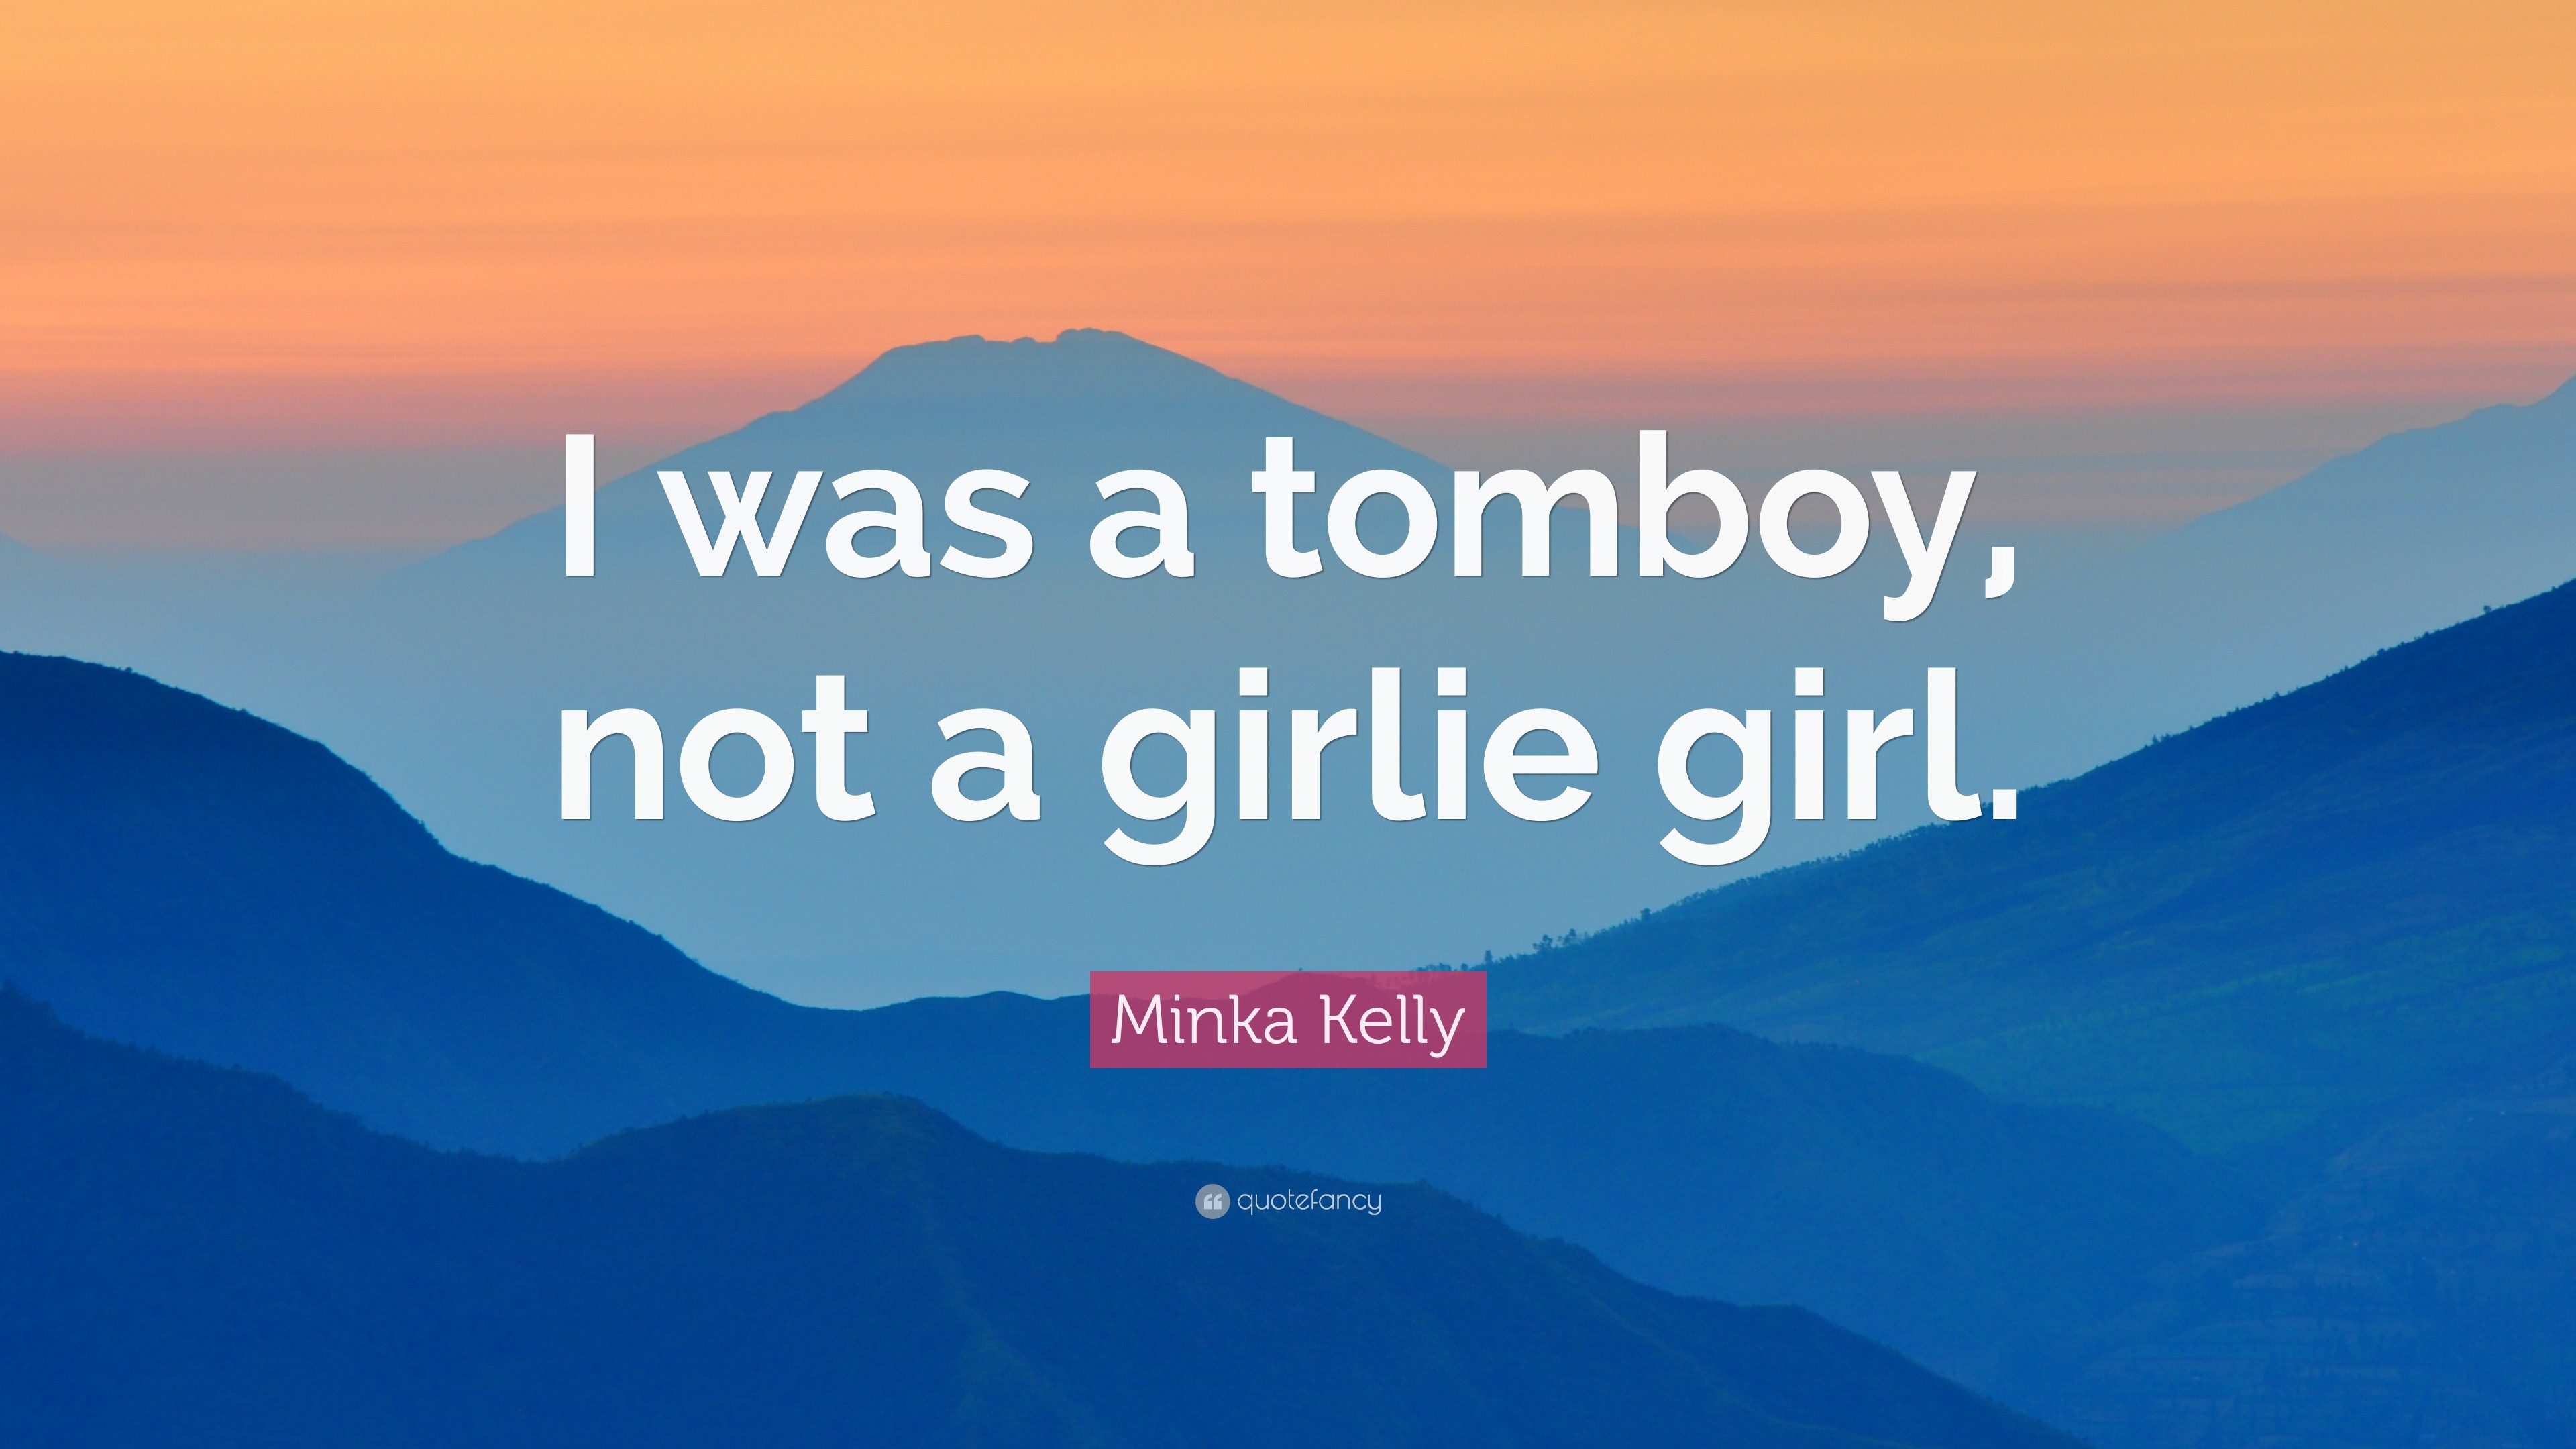 3840x2160 Minka Kelly Quote: “I was a tomboy, not a girlie girl.”